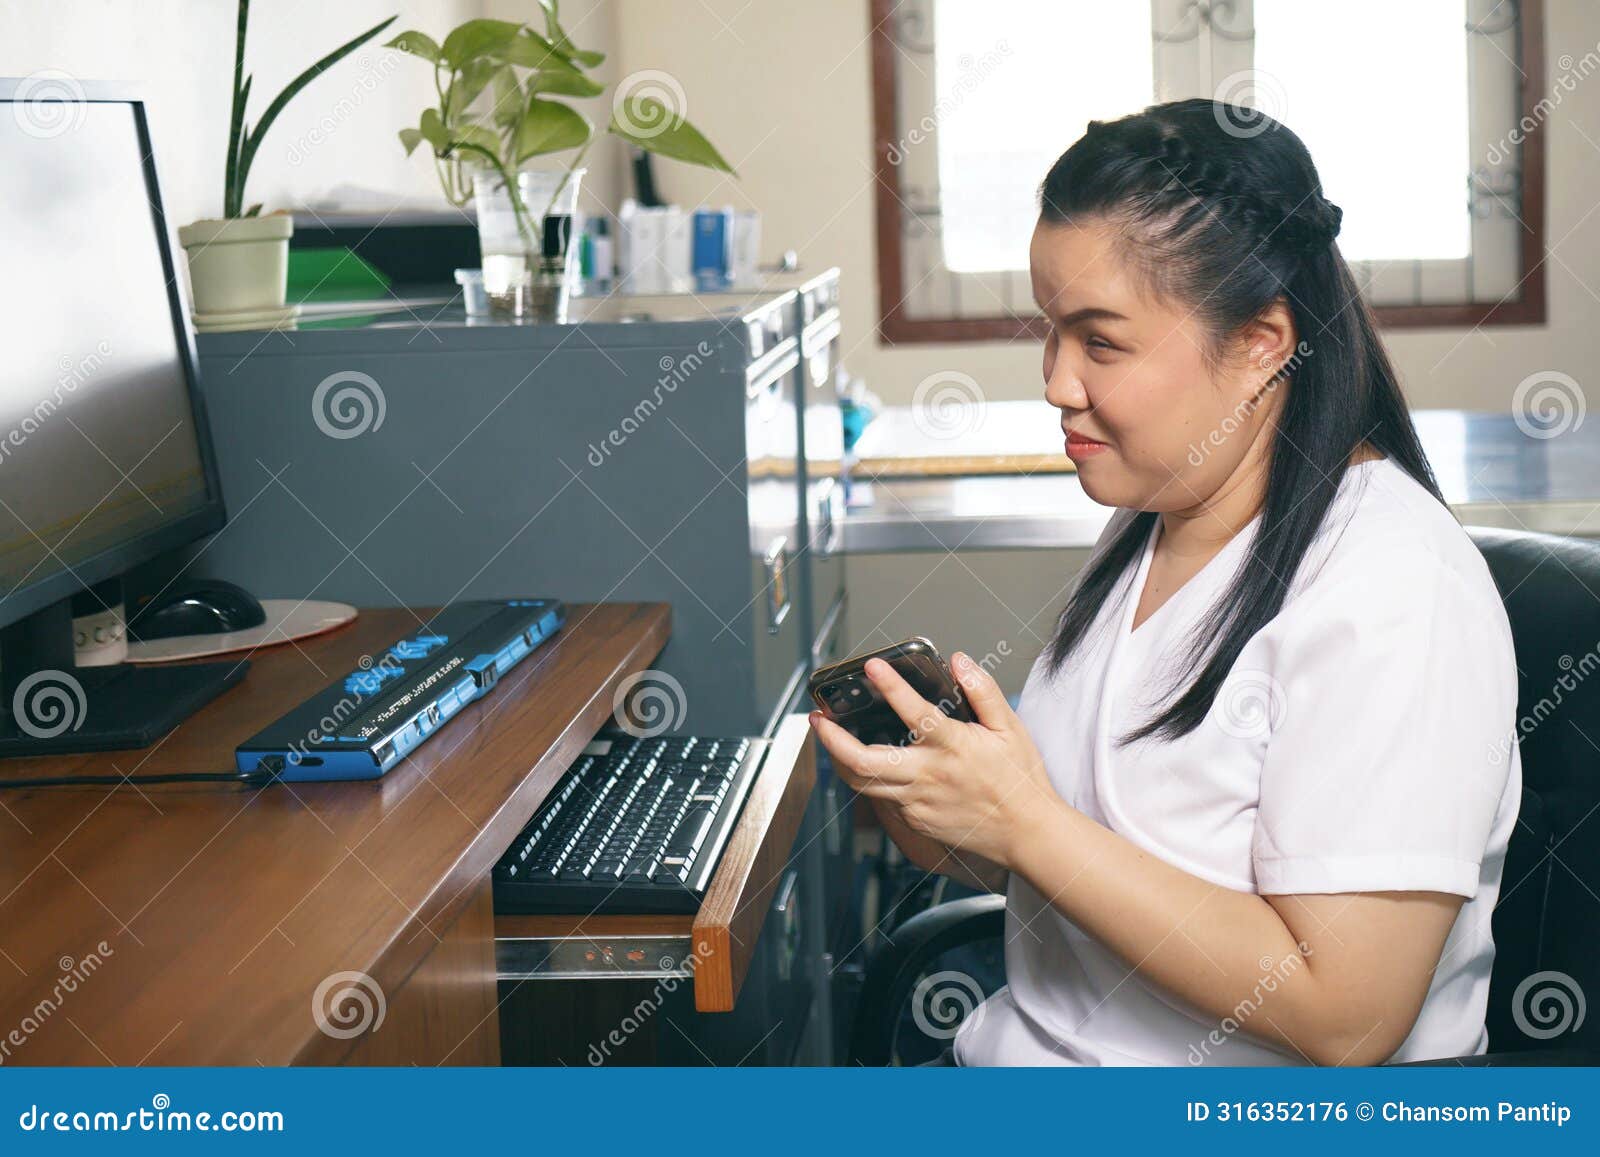 woman with blindness disability using smart phone with voice accessibility for persons with disabilities in workplace with